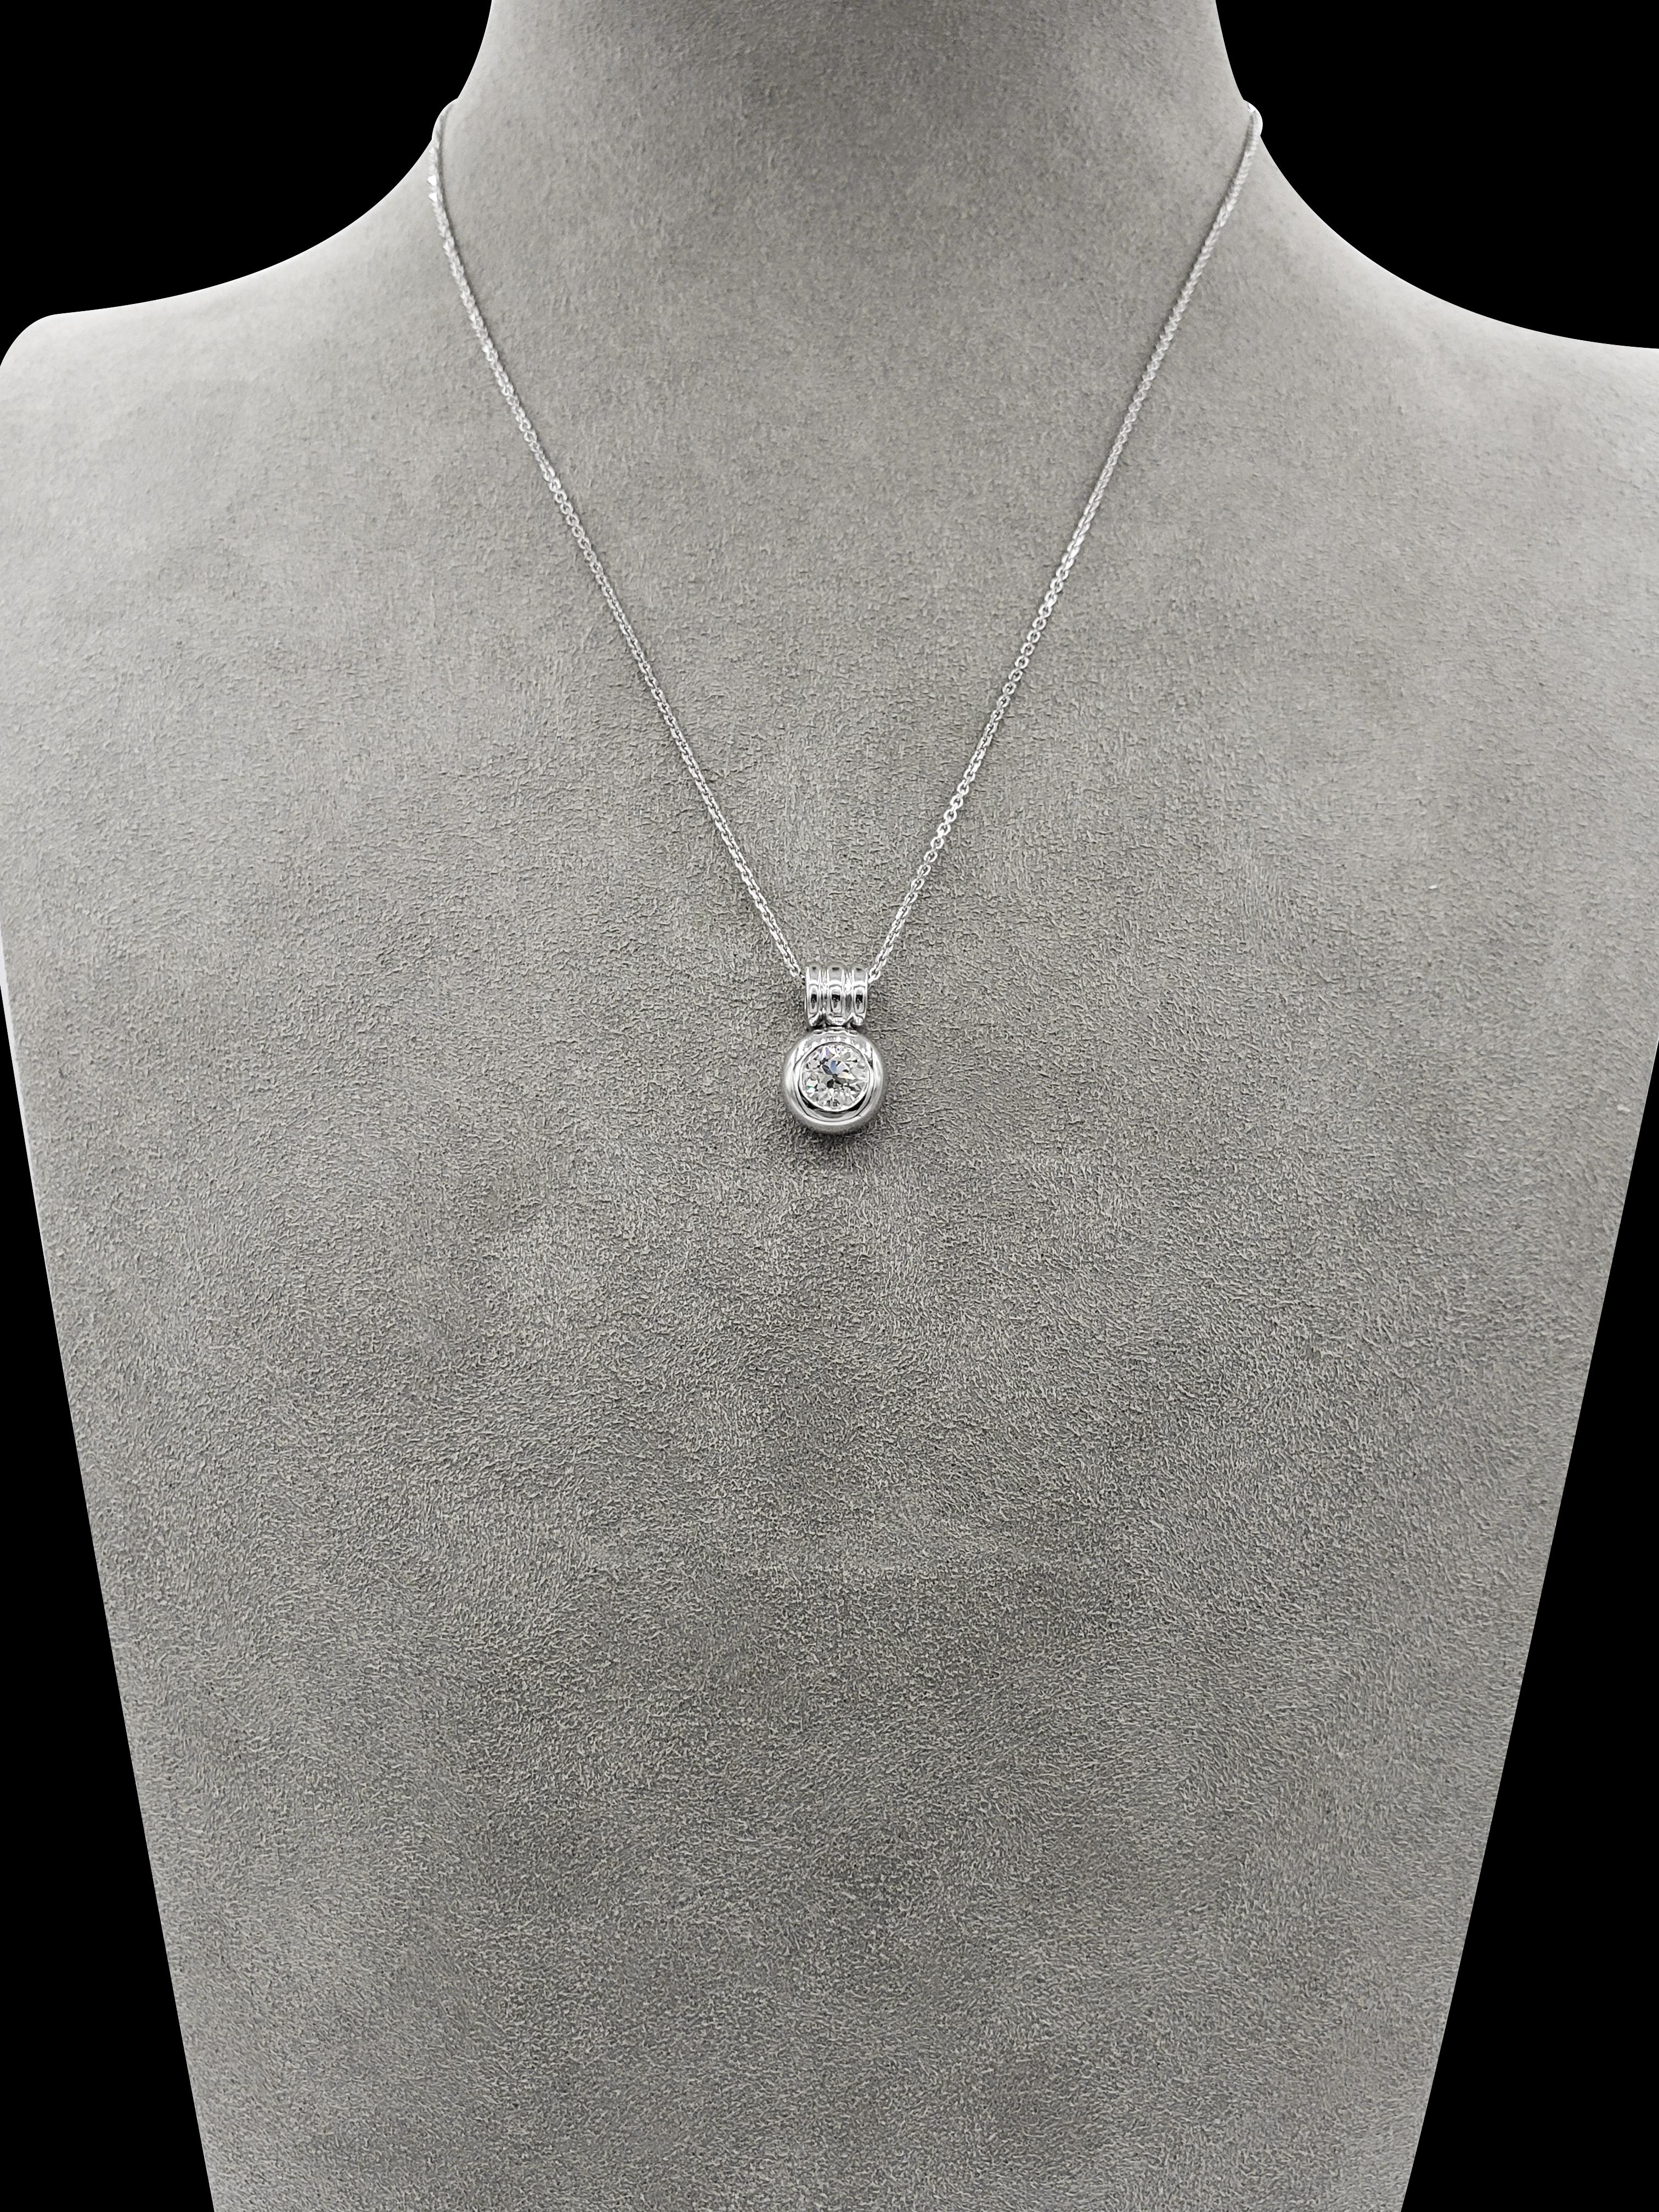 Pendant necklace showcasing a 0.91 carat diamond, set in a heavy bezel setting made in 18 karat white gold. Attached to a three-line bale suspended on a 16 inch white gold chain (sizable upon request).

Style available in different price ranges.